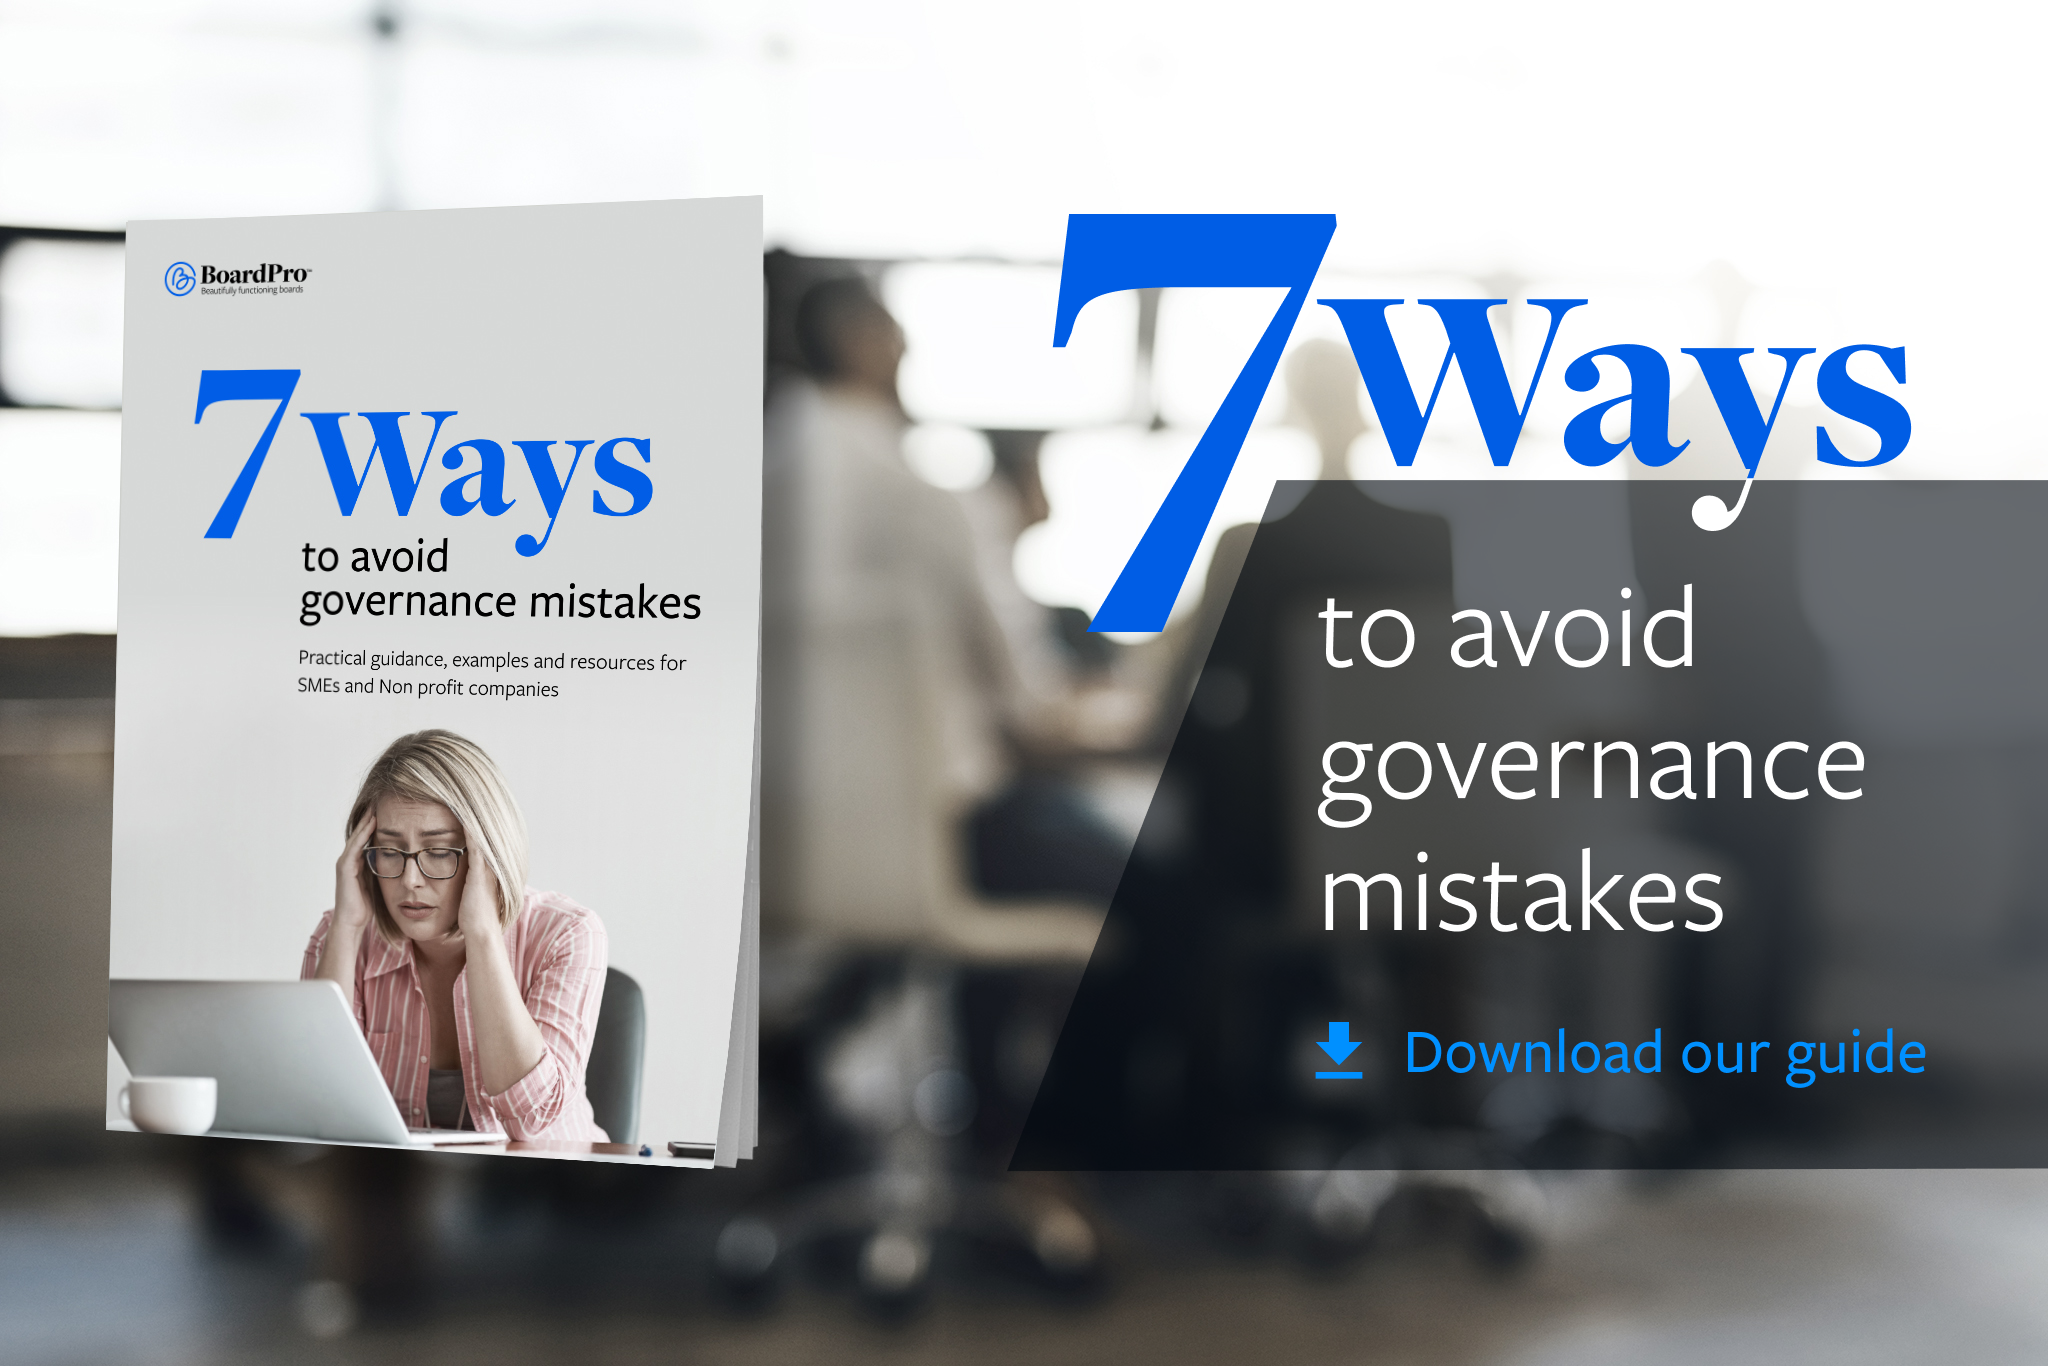 7 ways to avoid governance mistakes